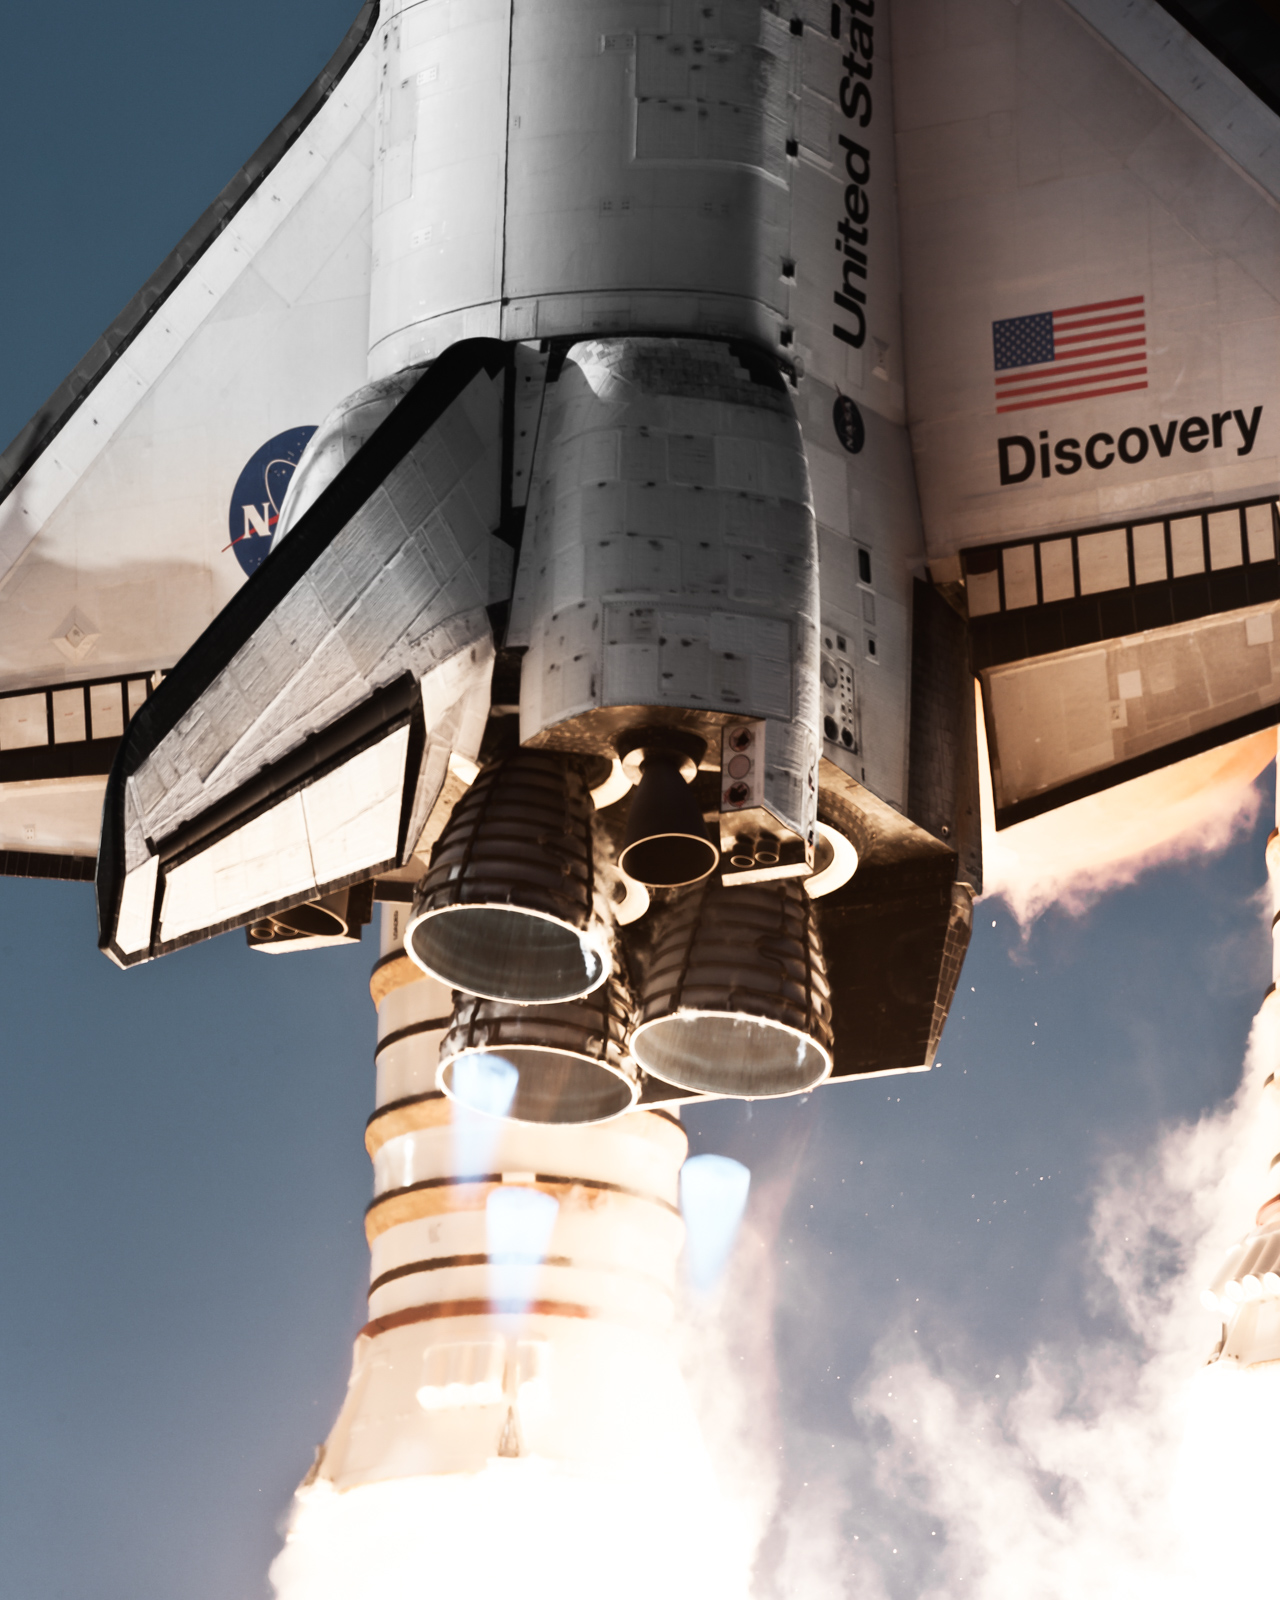 How One Photographer Took Incredible Close-Ups Of Space Shuttle Launches